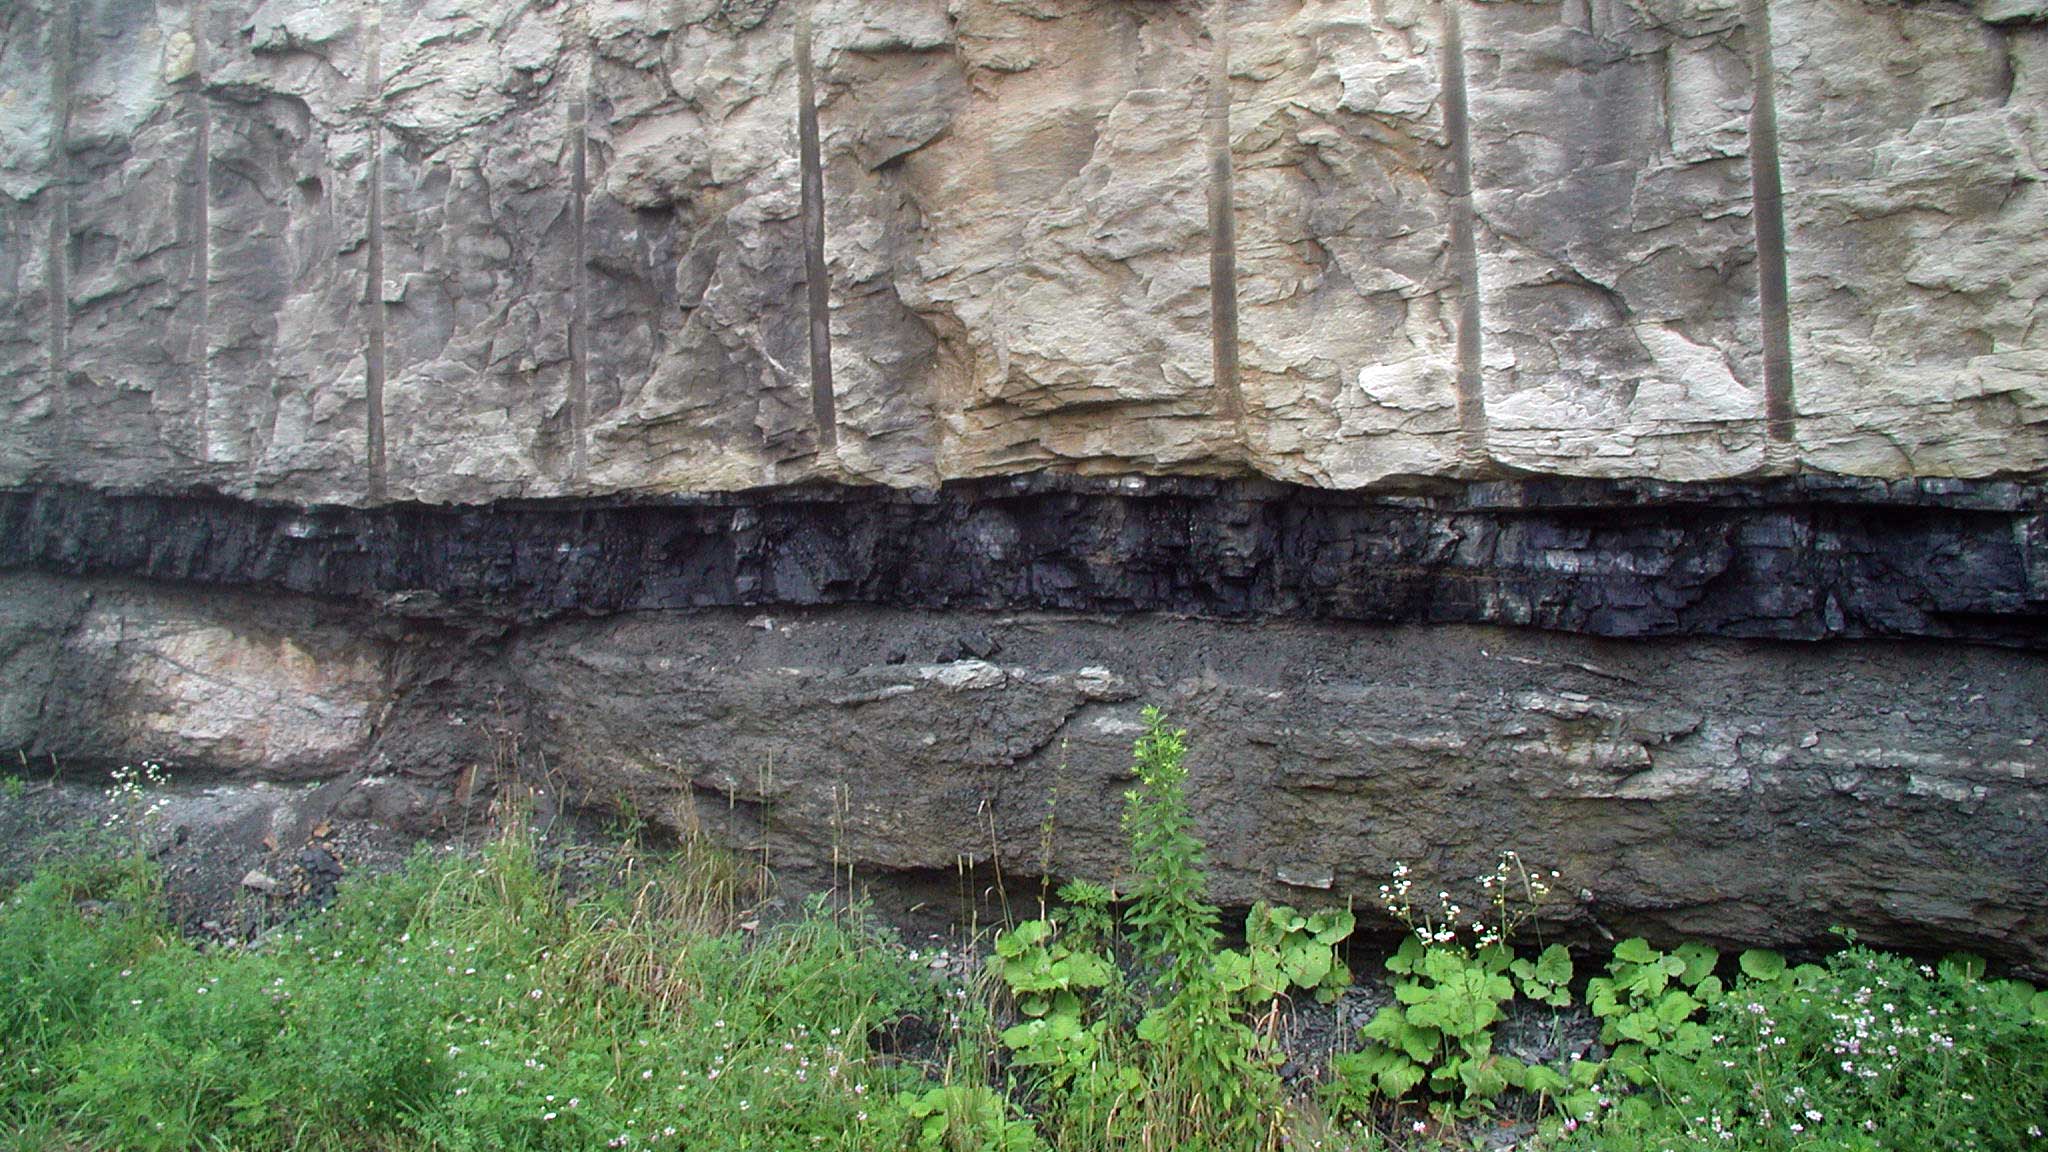 A coal seam in a face of exposed rock